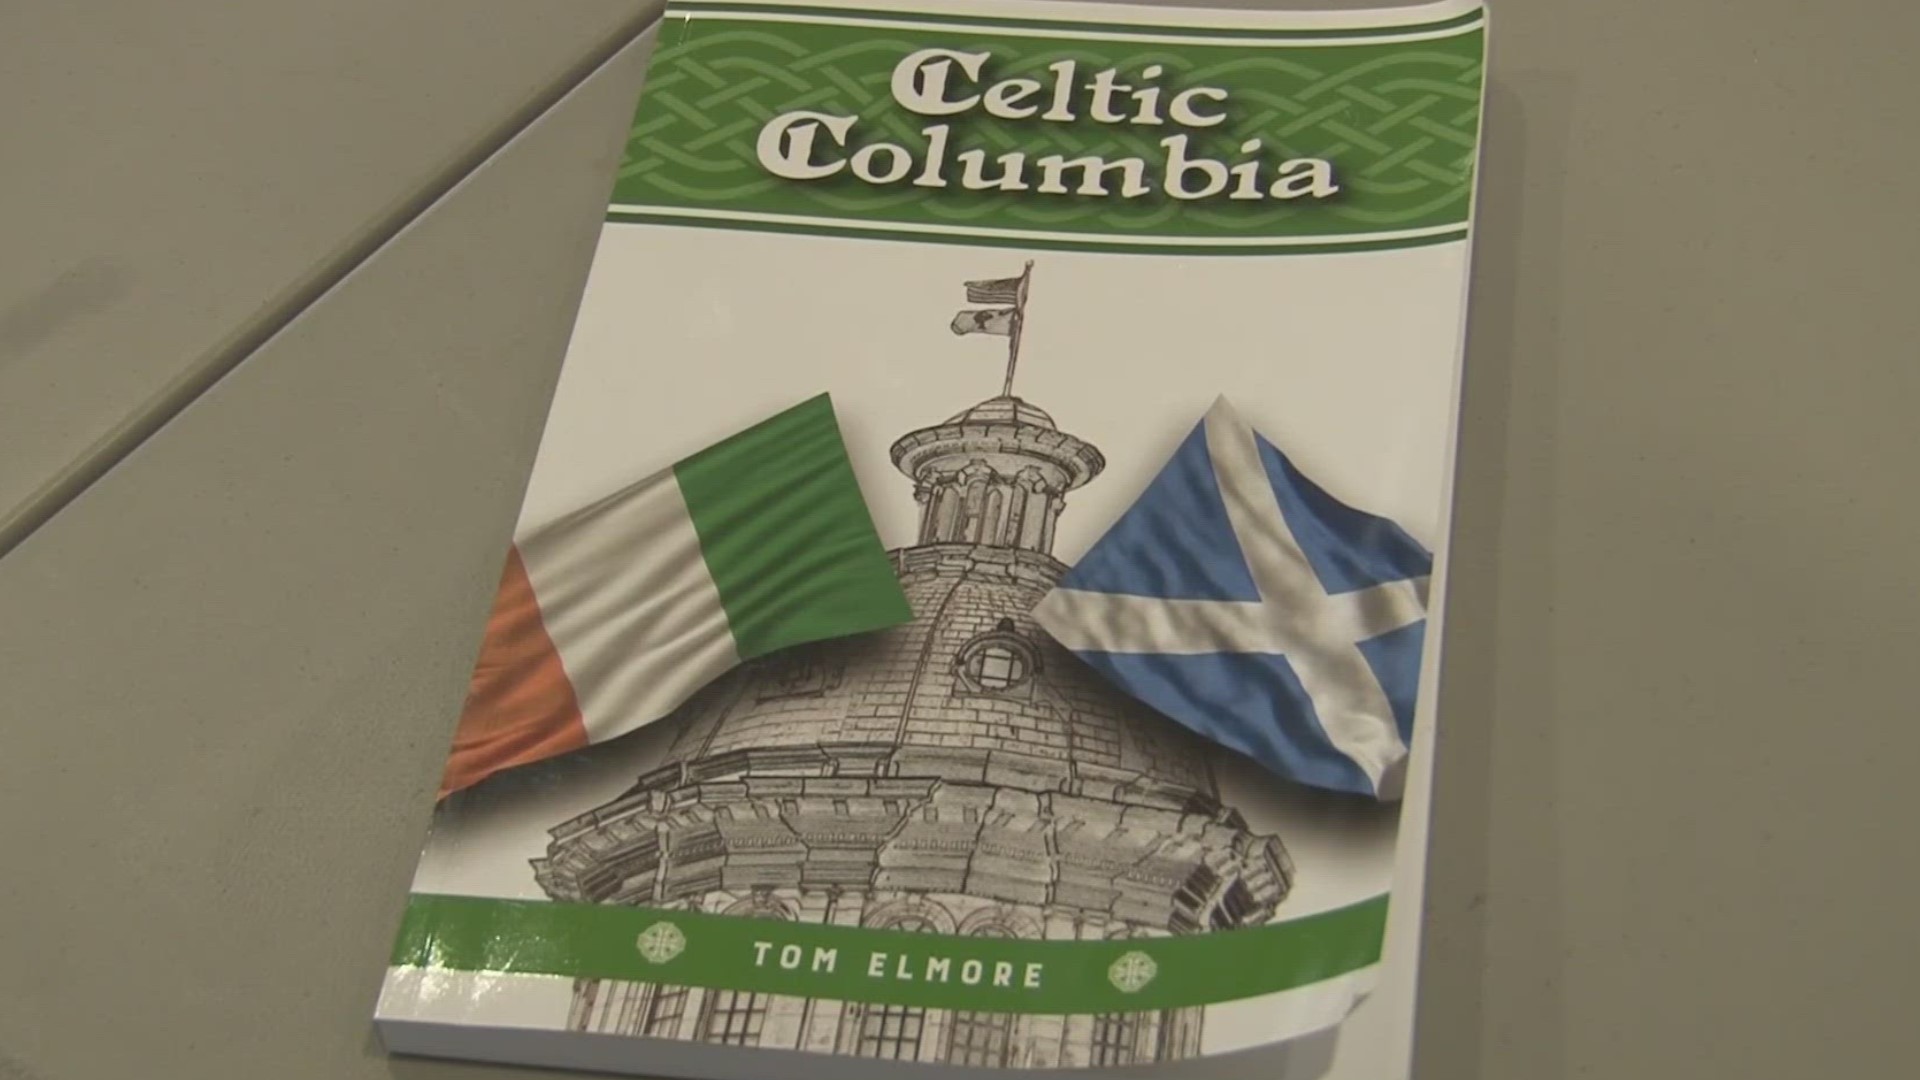 As St. Patrick's day is celebrated, Midlands has quite a connection to their Irish roots.